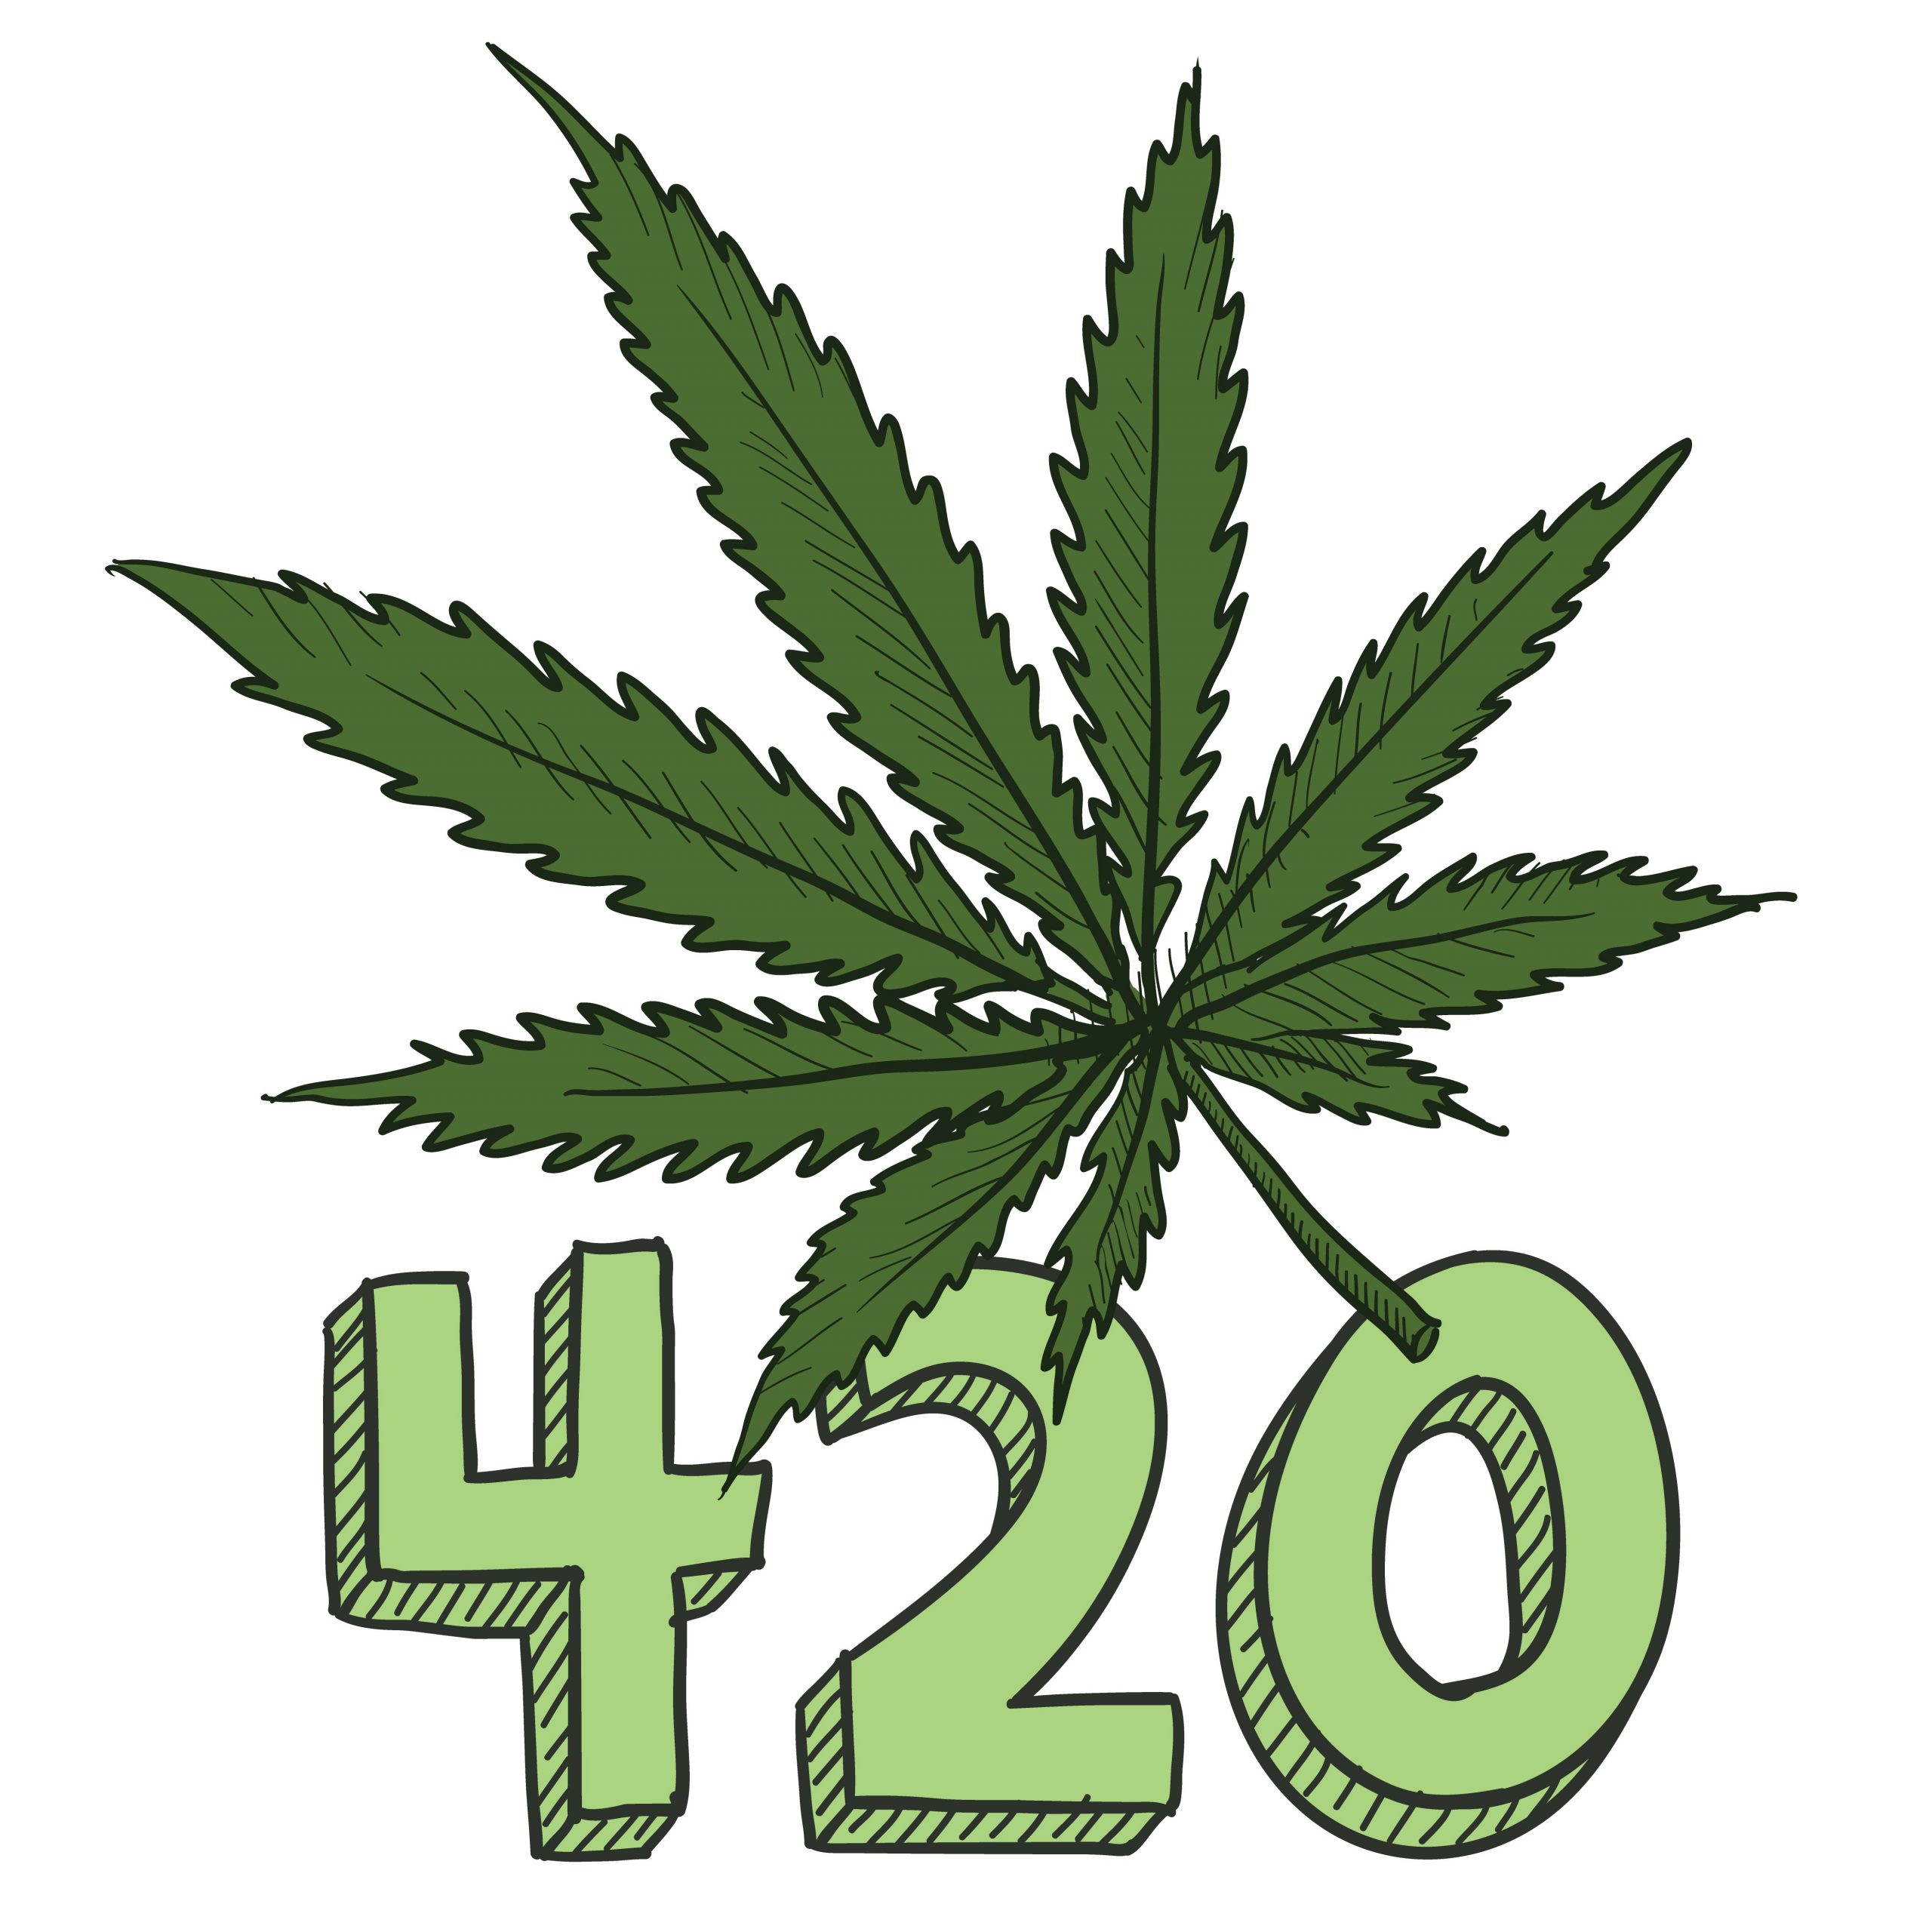 Marijuana and 420: Where did the codeword come from?